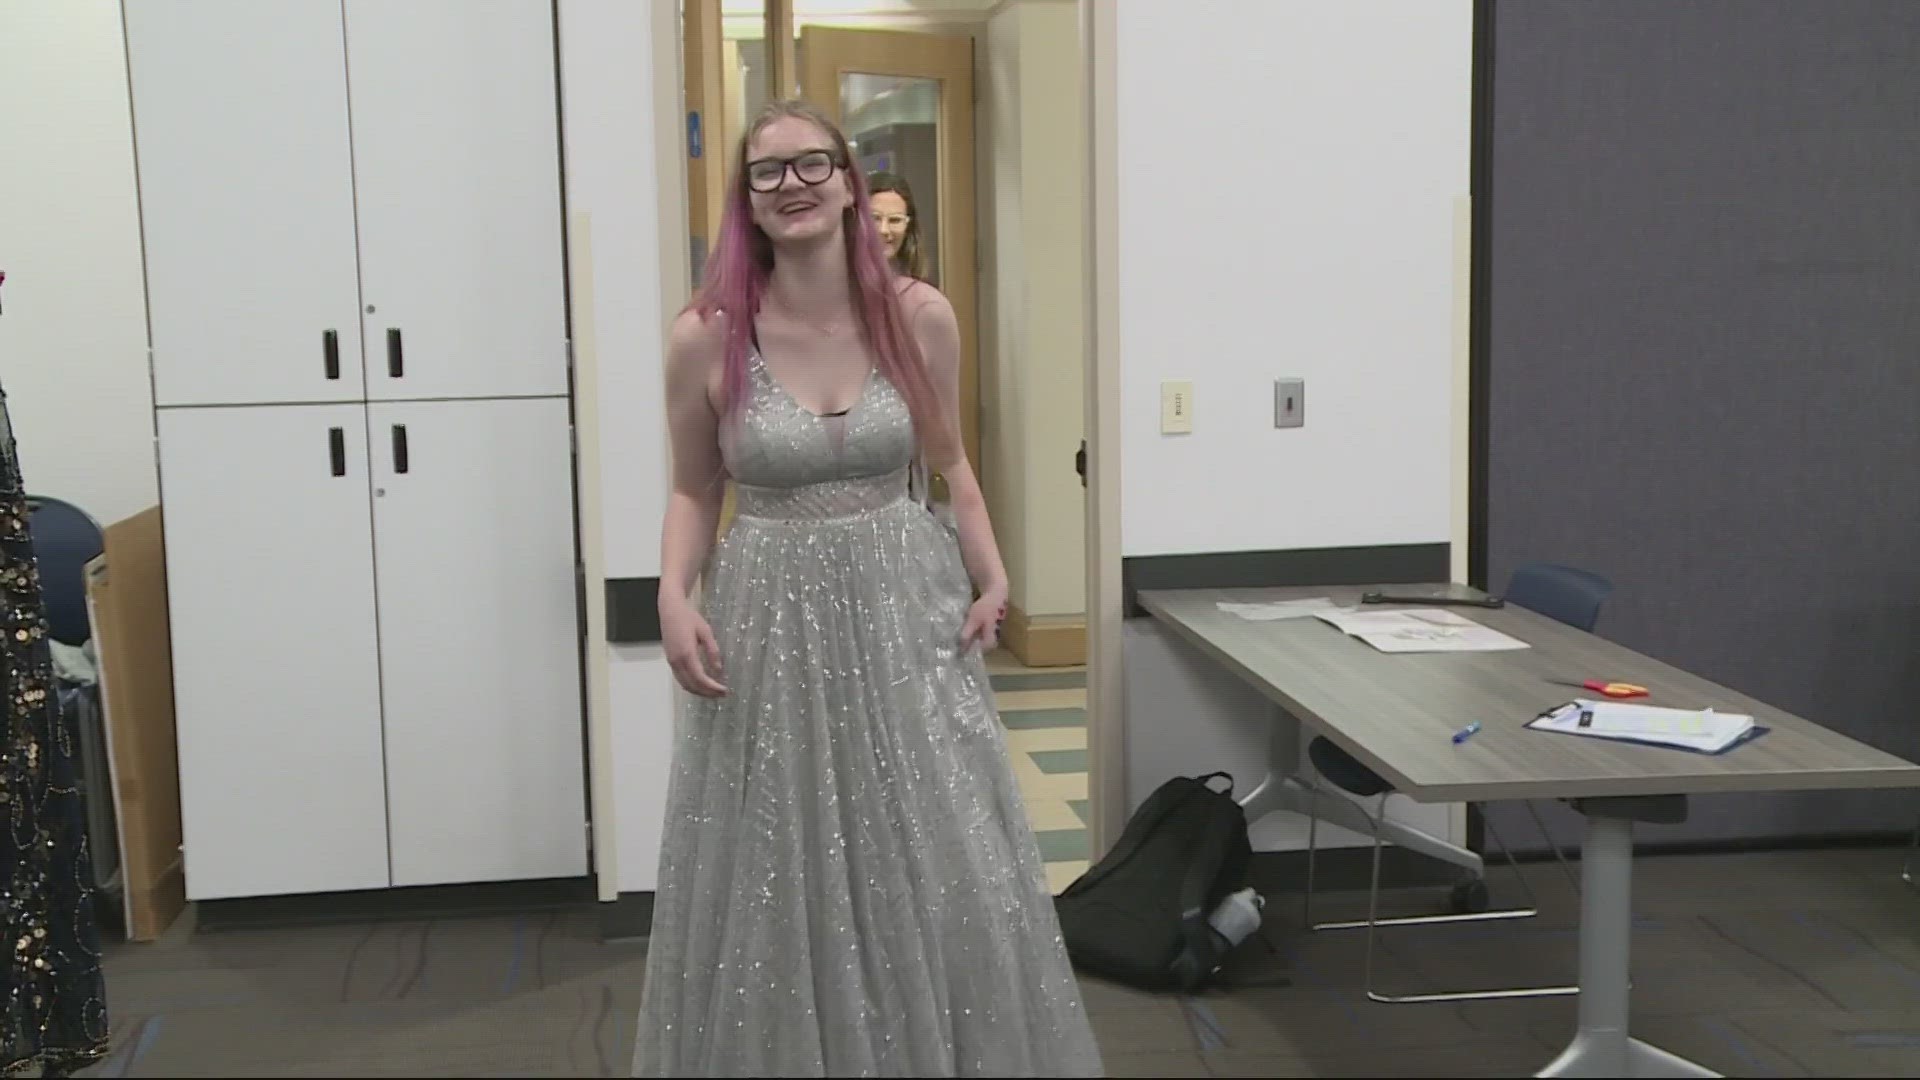 A call to Goodwill industries began with the hope of a few donated dresses, then turned into a shopping adventure for Clackamas County students.